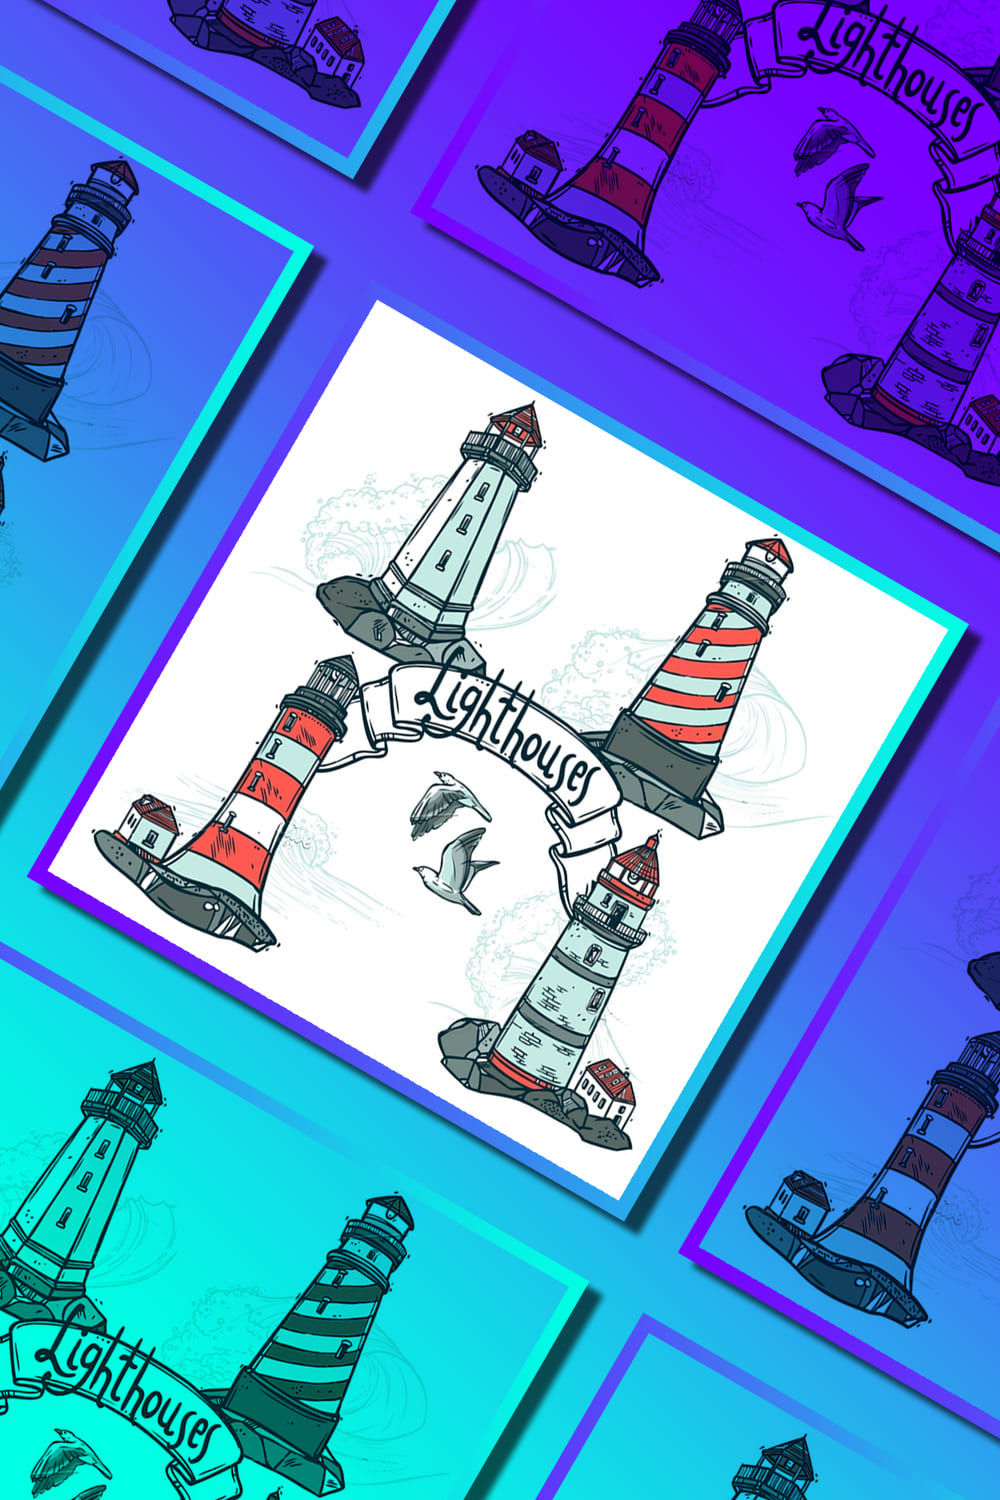 Drawings of lighthouses near which seagulls fly.